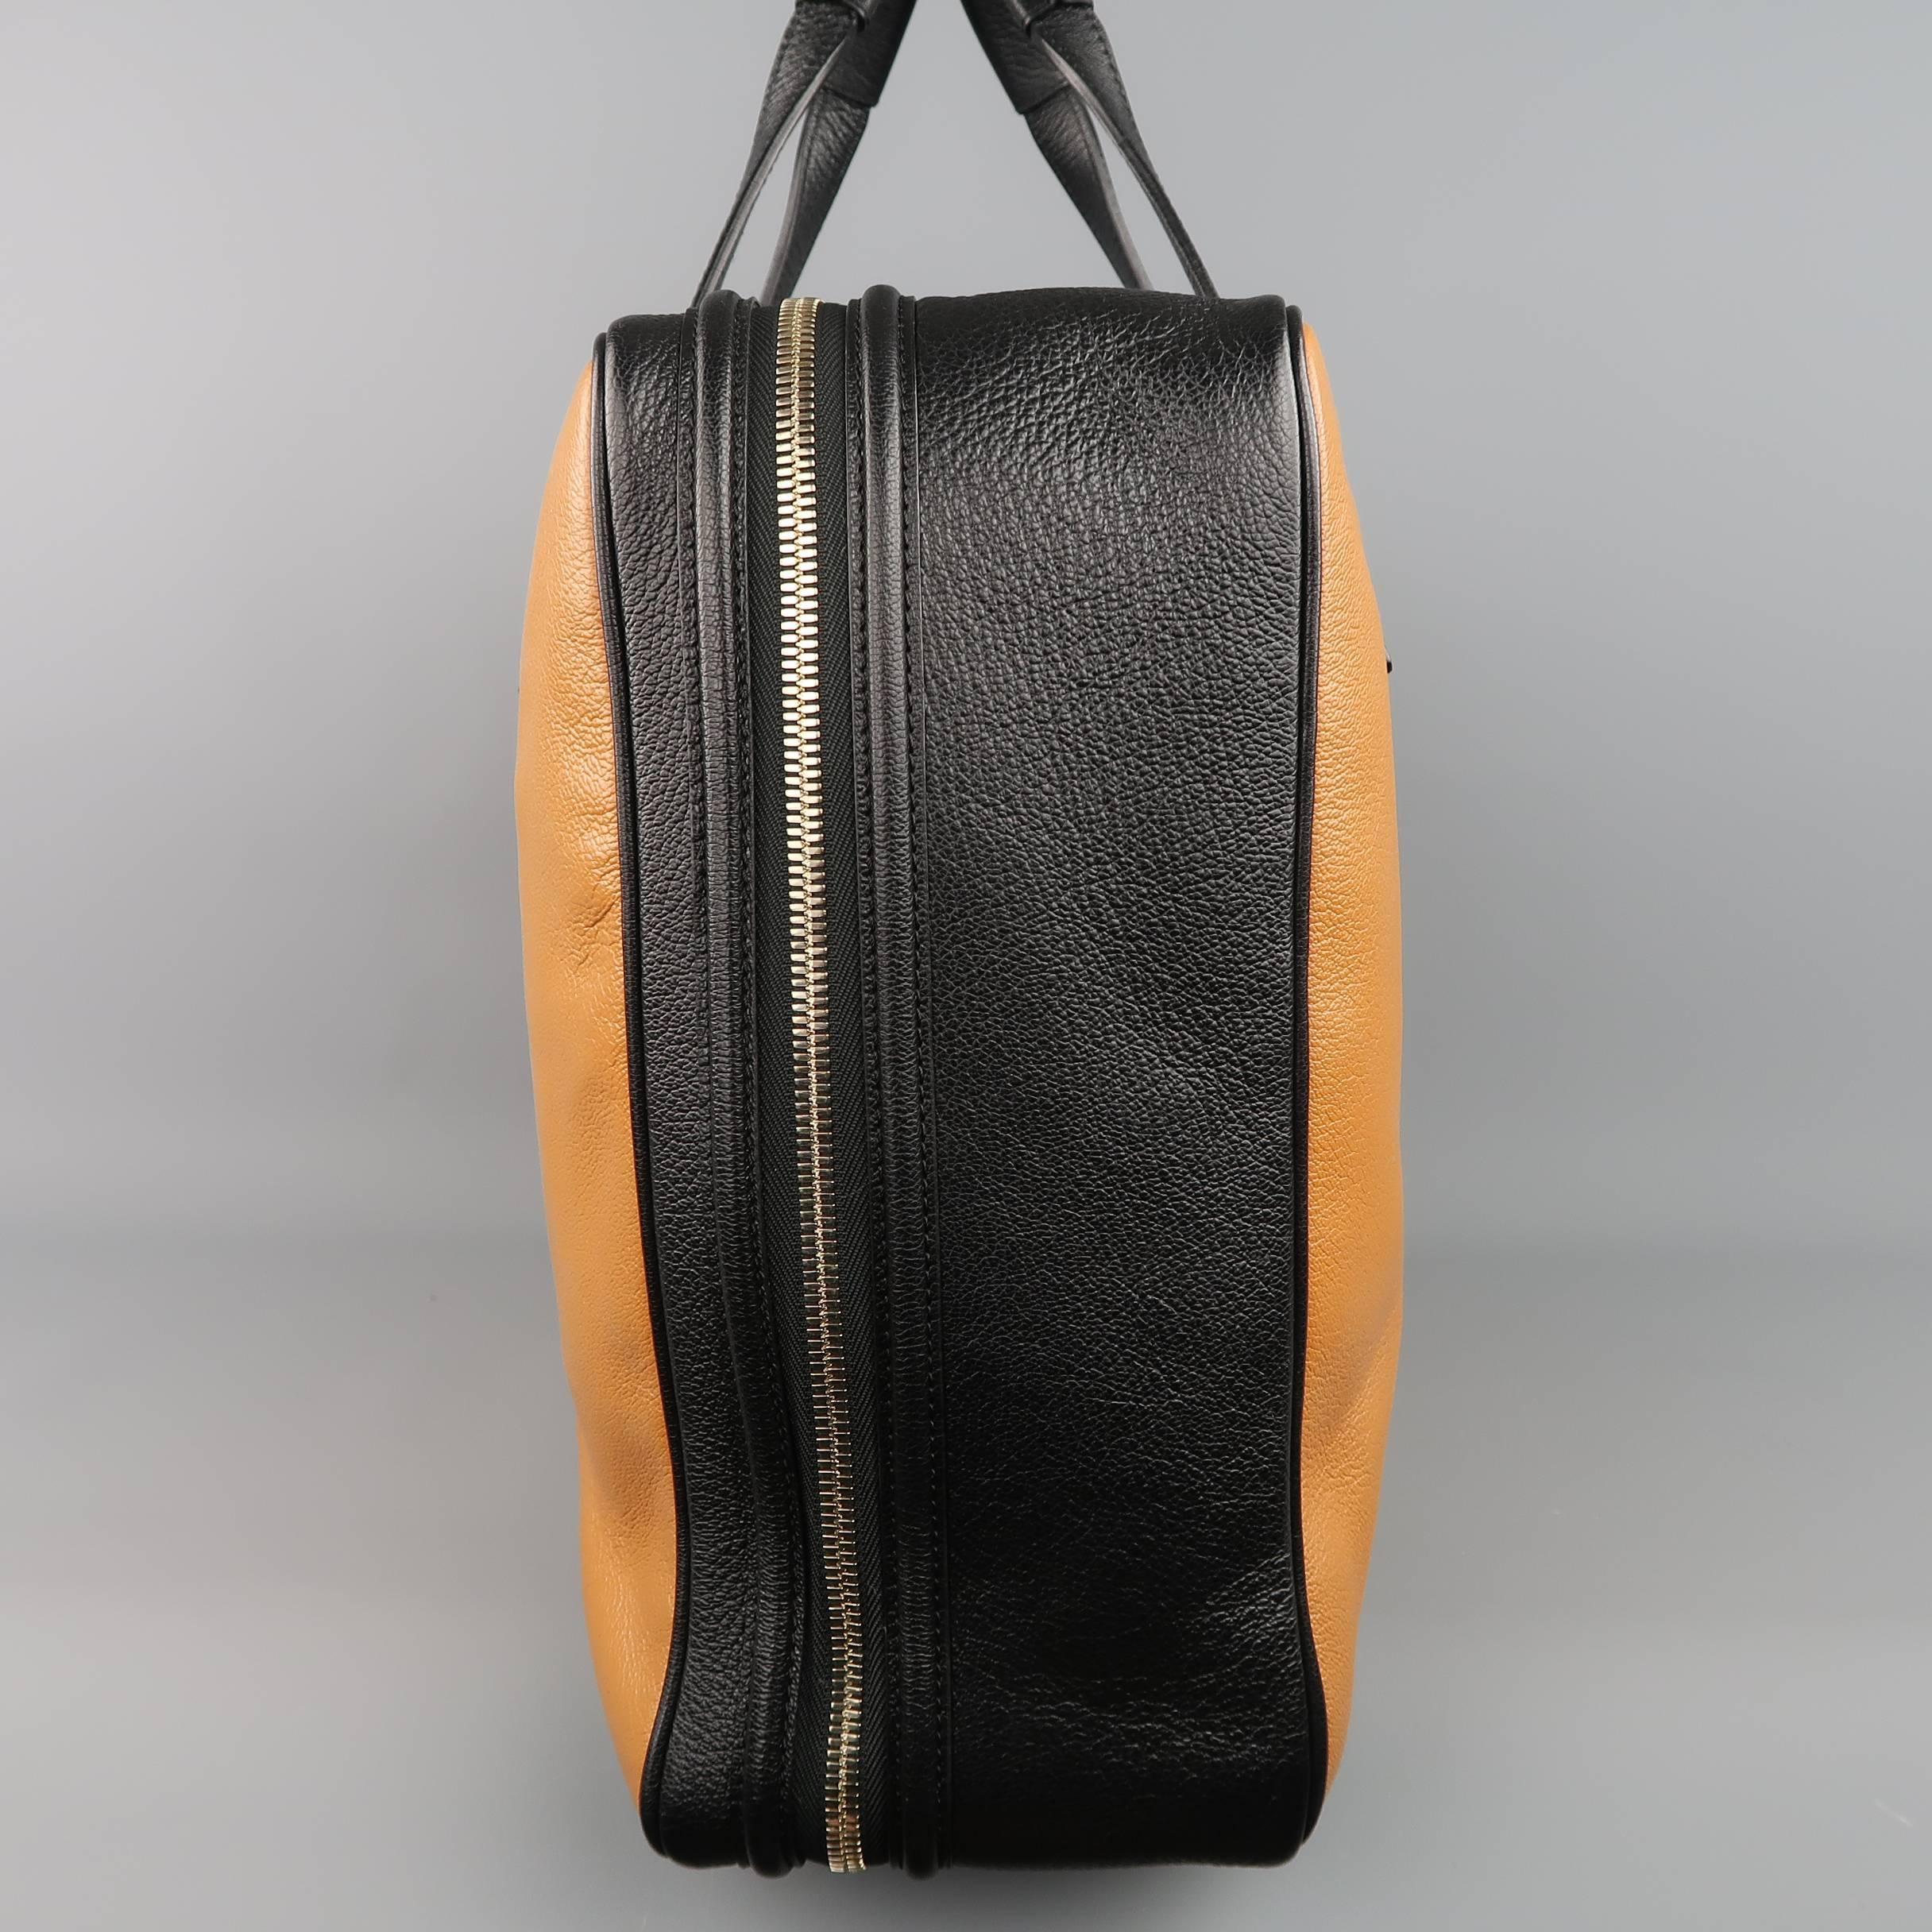 Large Tom Ford travel briefcase comes in tan and black pebbled leather and features double T line top handles with wood accents, light gold tone double zip top closure, lock with leather cover, key clochette, exterior embossed card holder, and